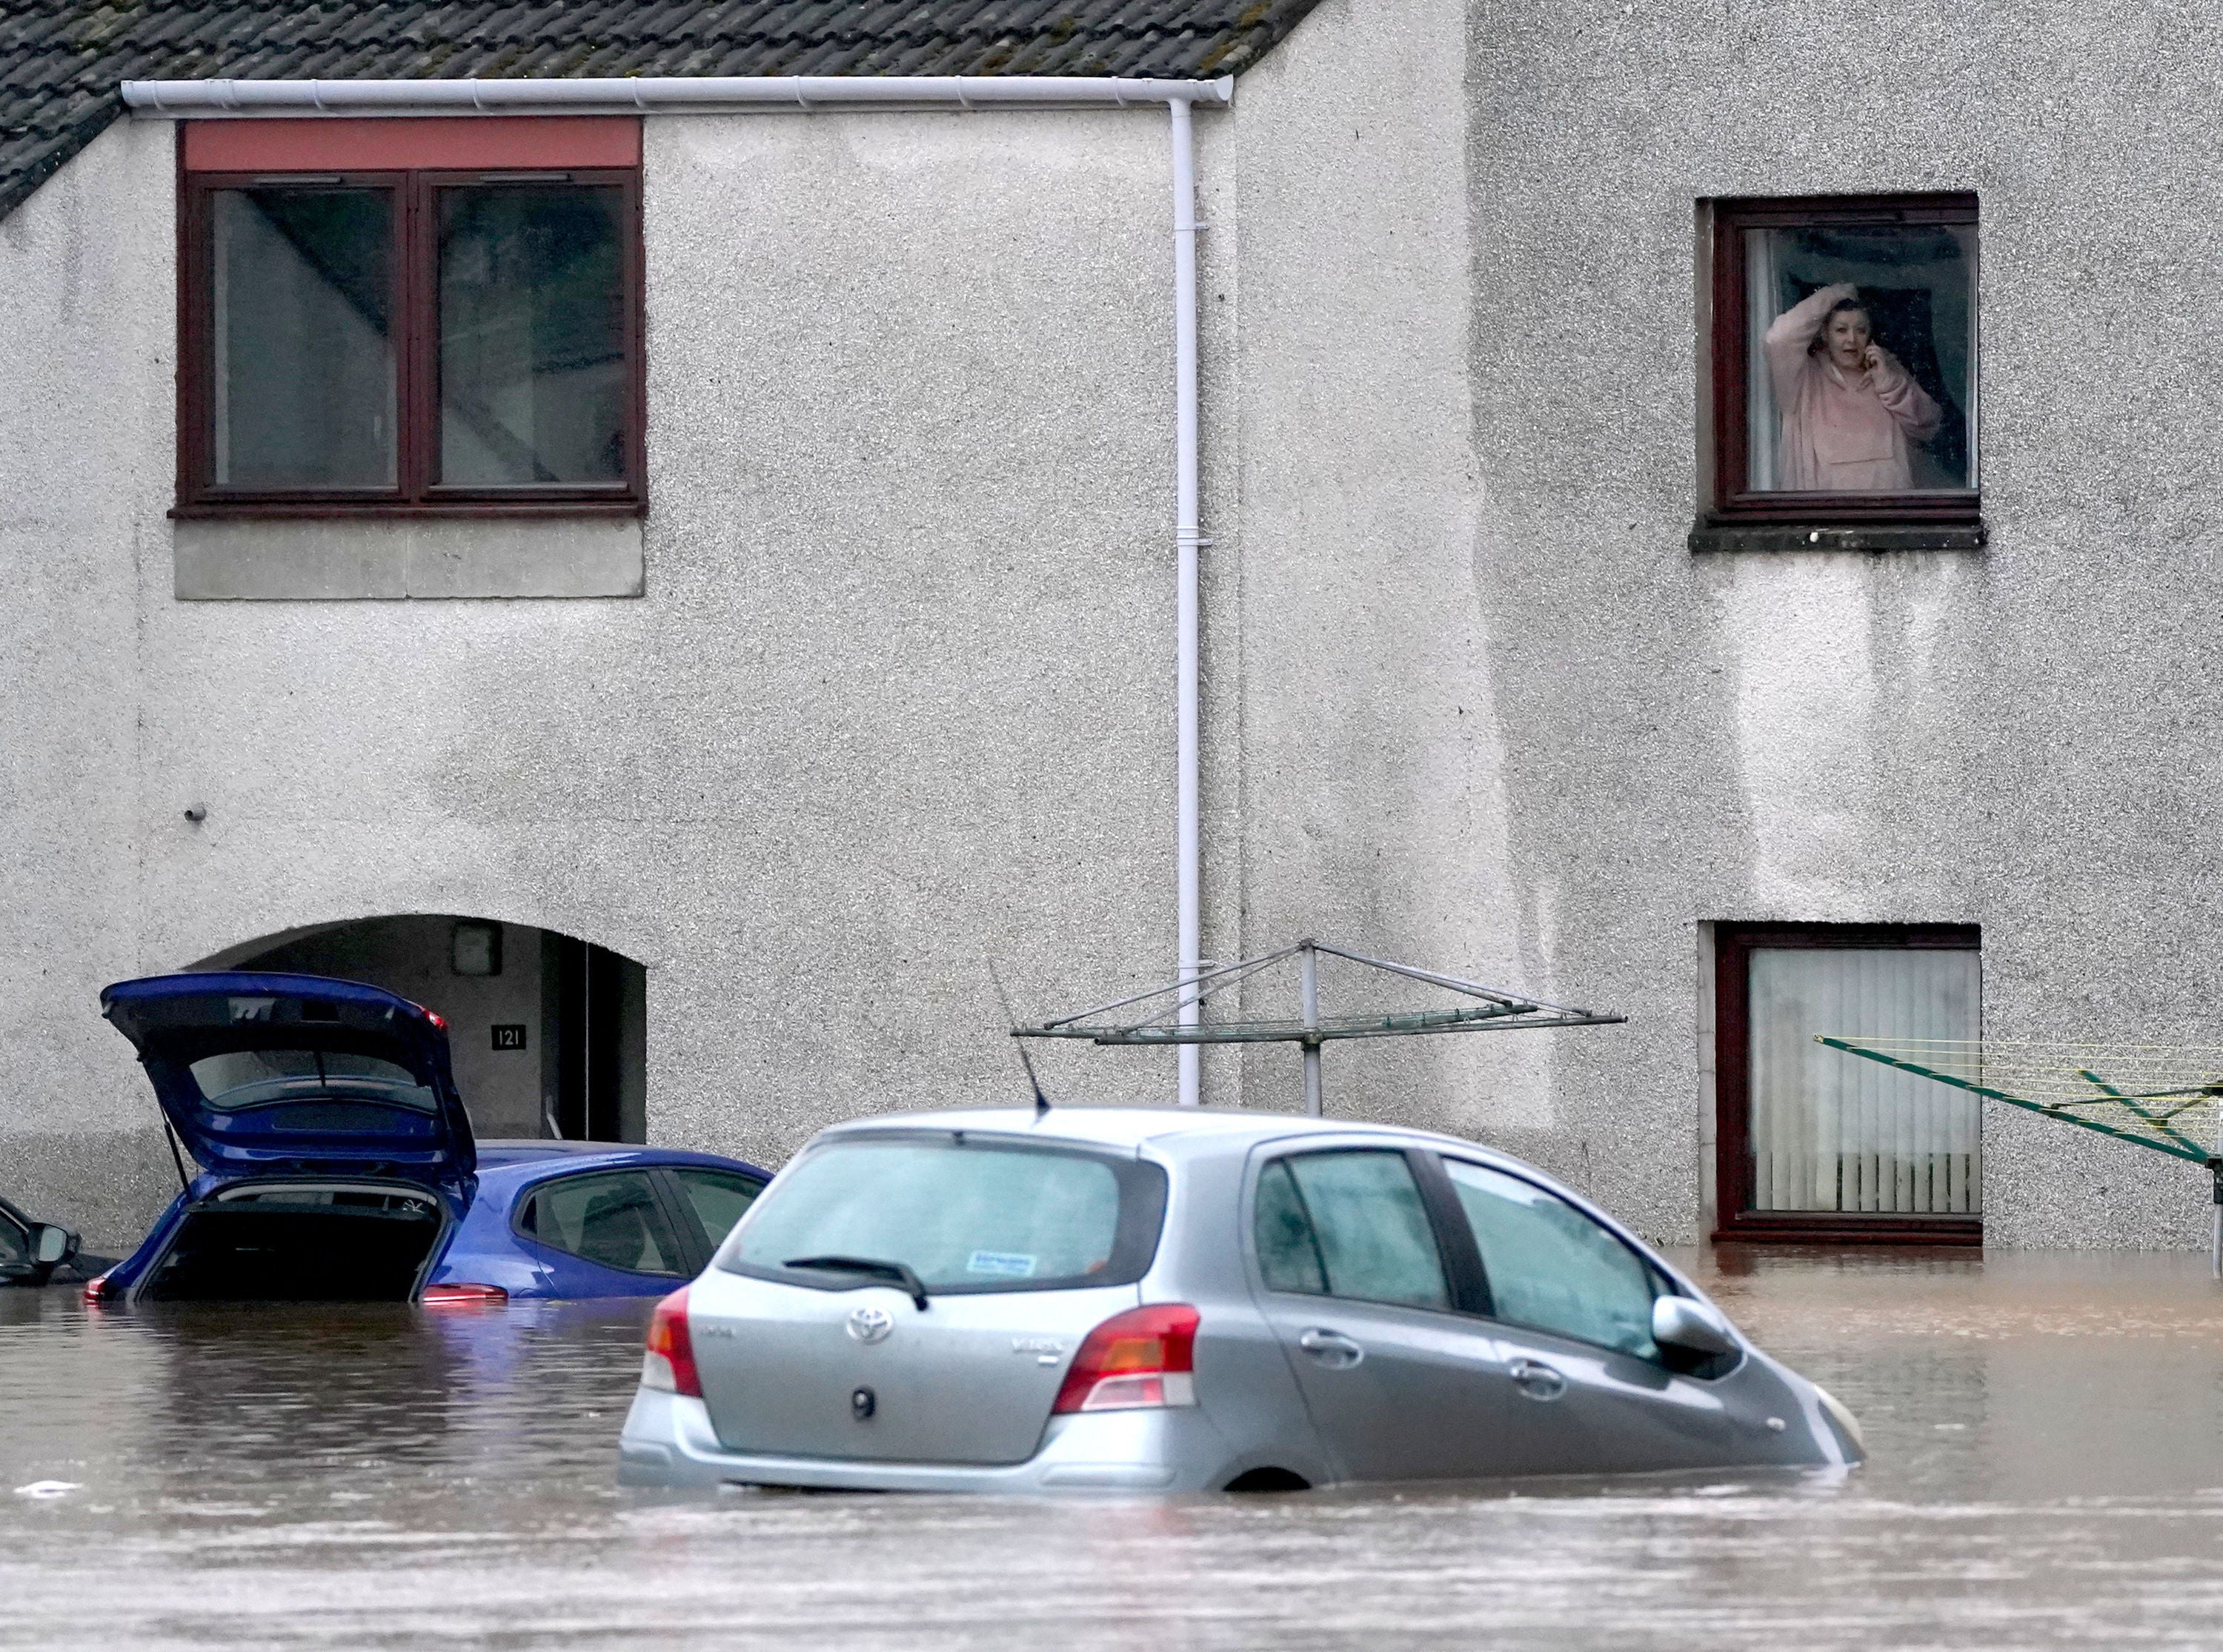 A person looks from a window at a submerged car in flood water in Brechin, Scotland